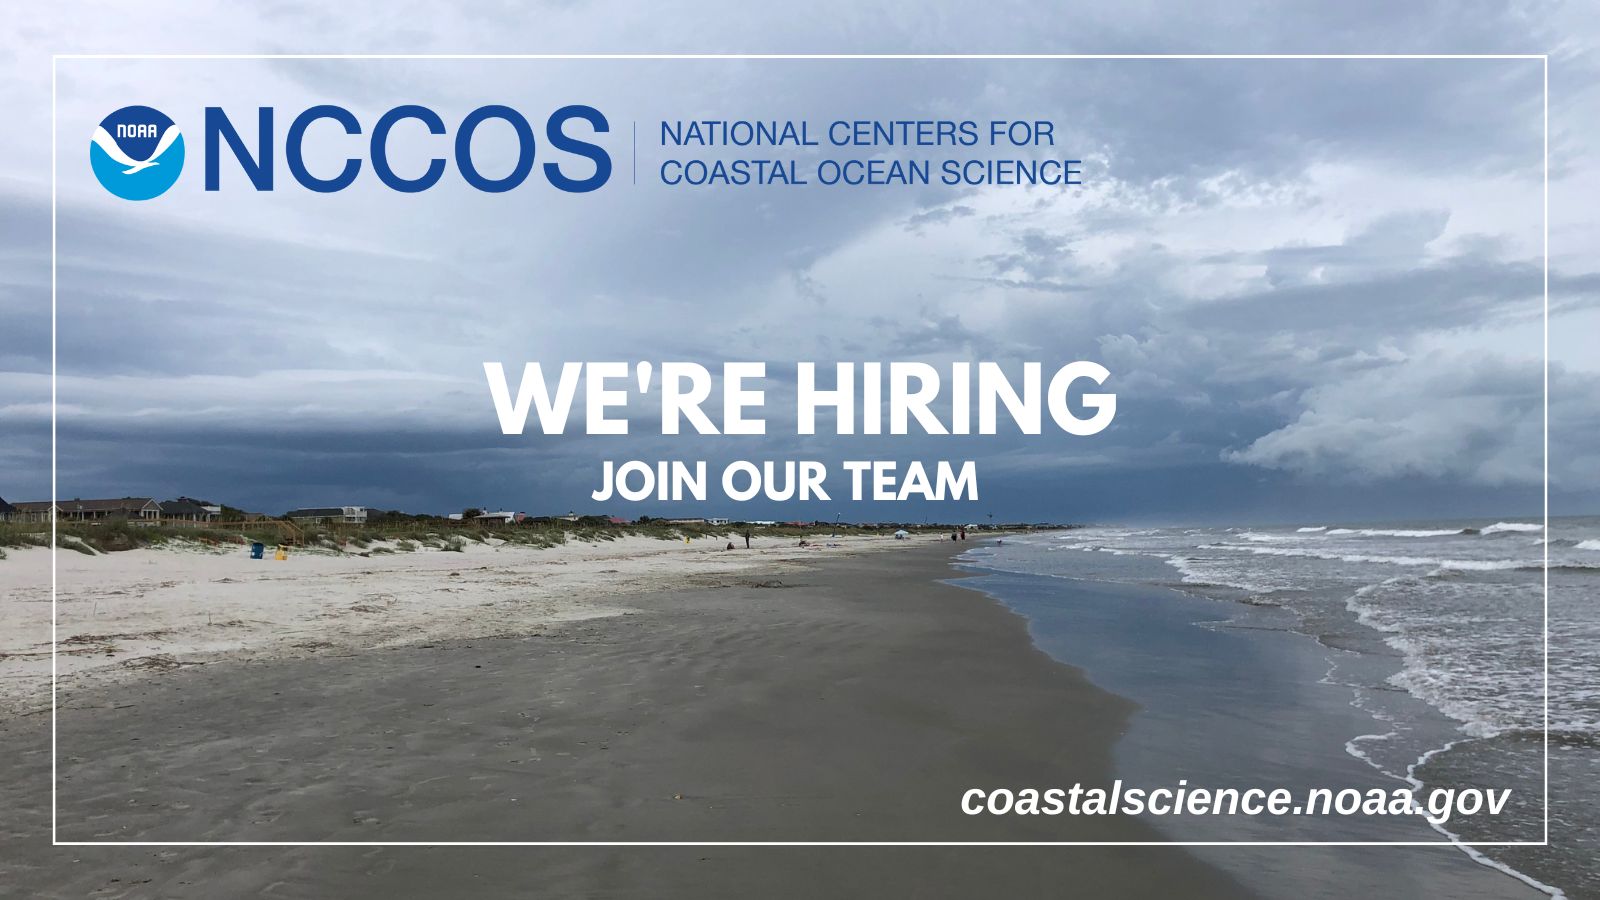 We're hiring. Join our team. coastalscience.noaa.gov